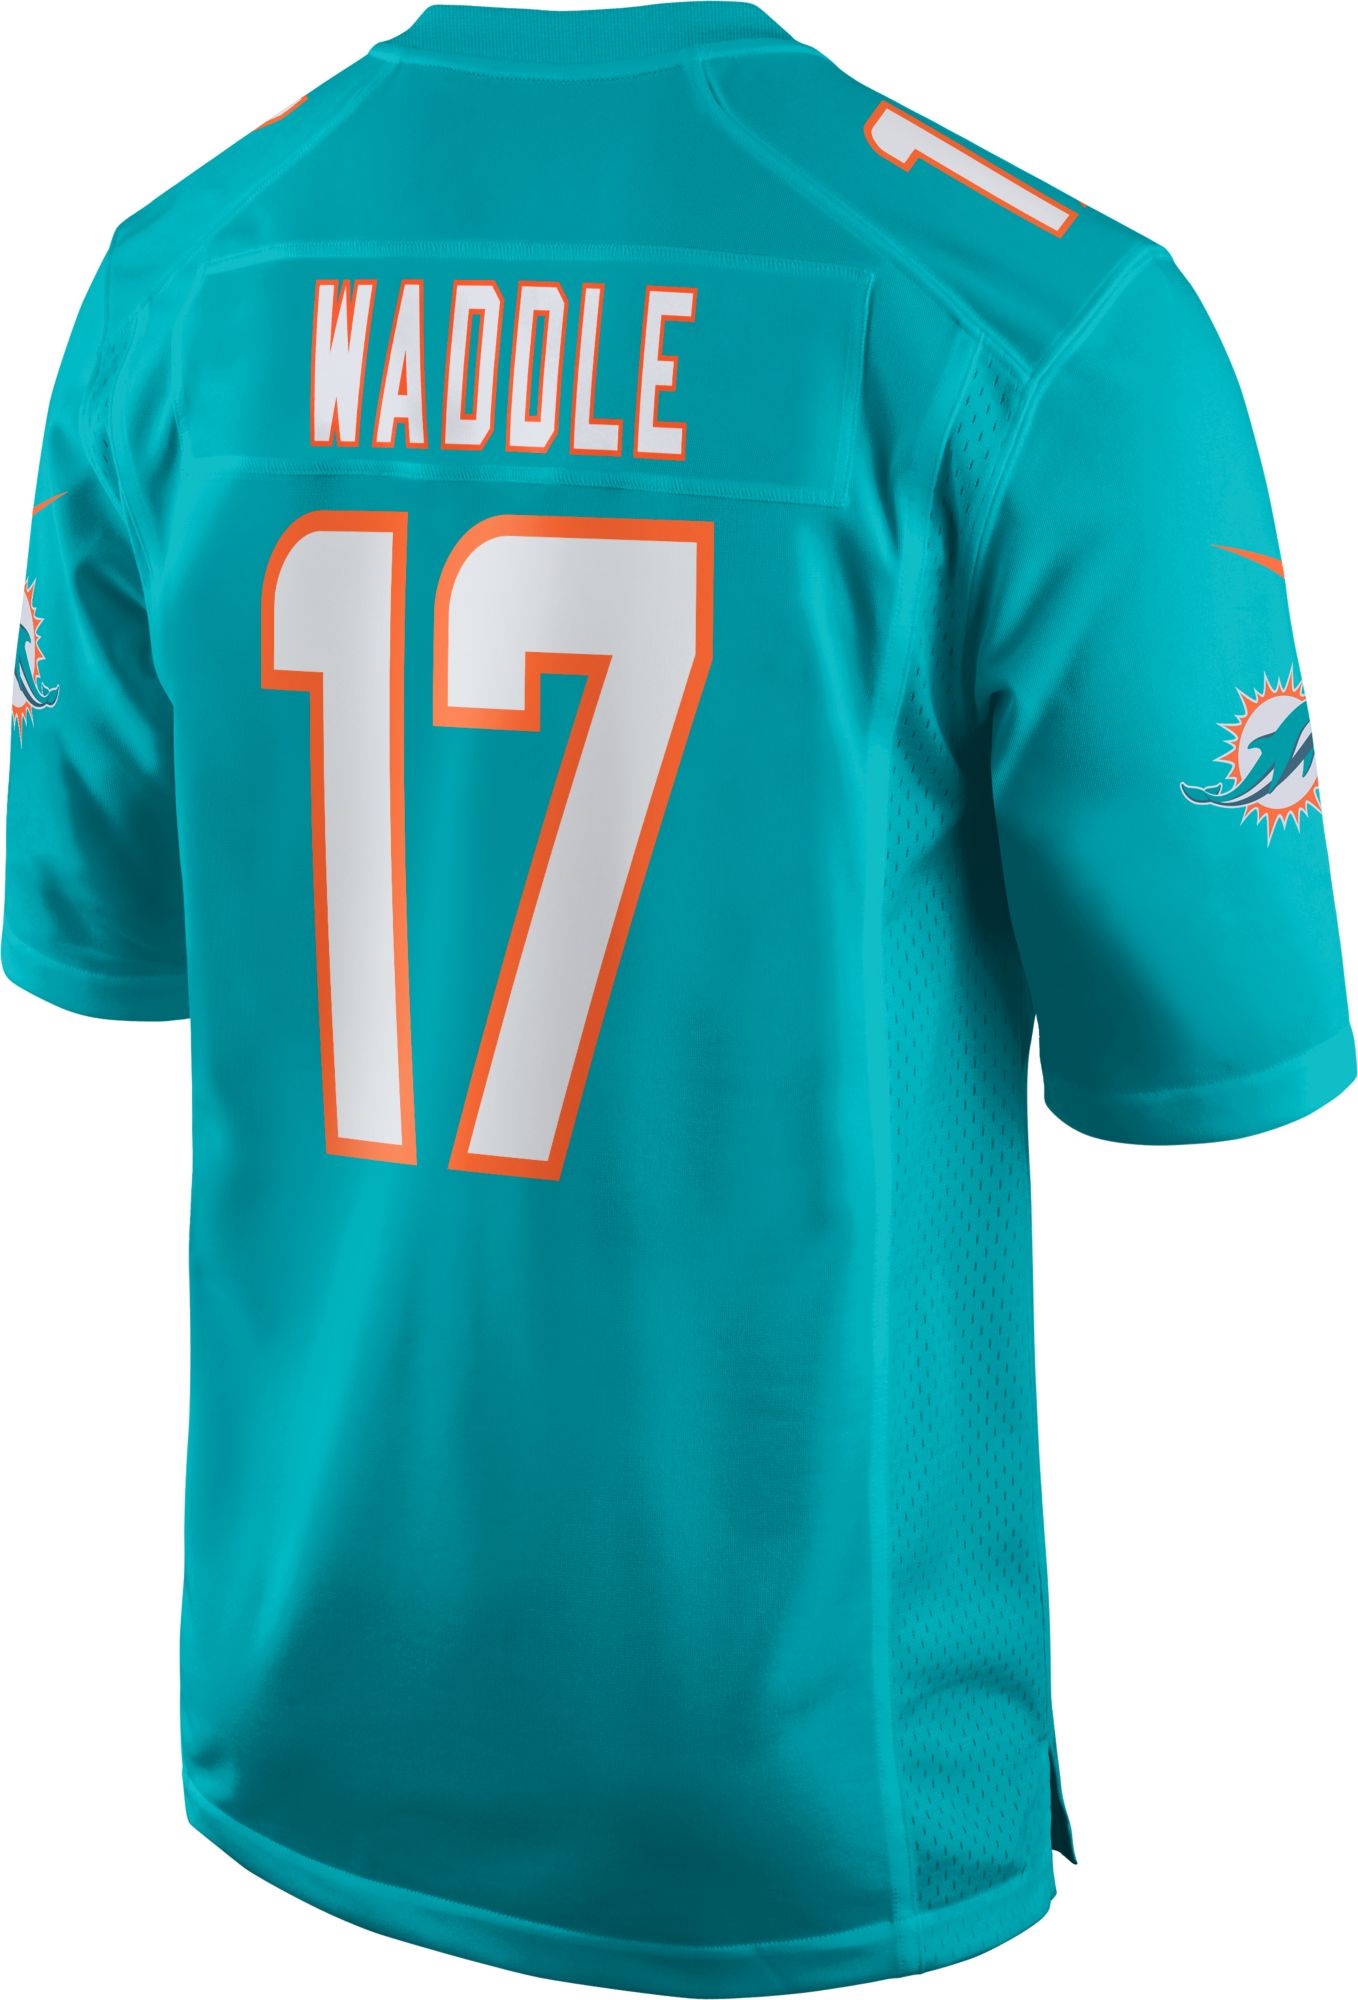 miami dolphins jersey waddle